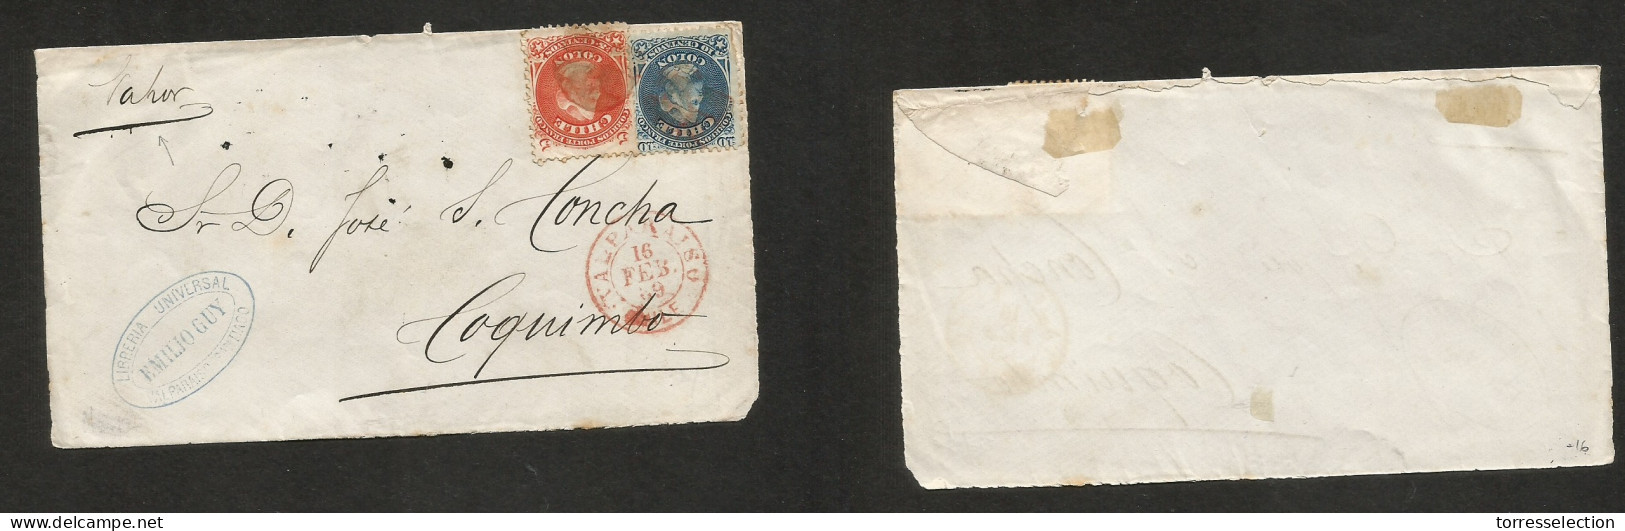 CHILE. 1869 (16 Feb) Valp - Coquimbo. Por Vapor Cover Front Fkd 5c + 10c Second Design, Tied Cork + Red Cds. Opportuniy. - Chili